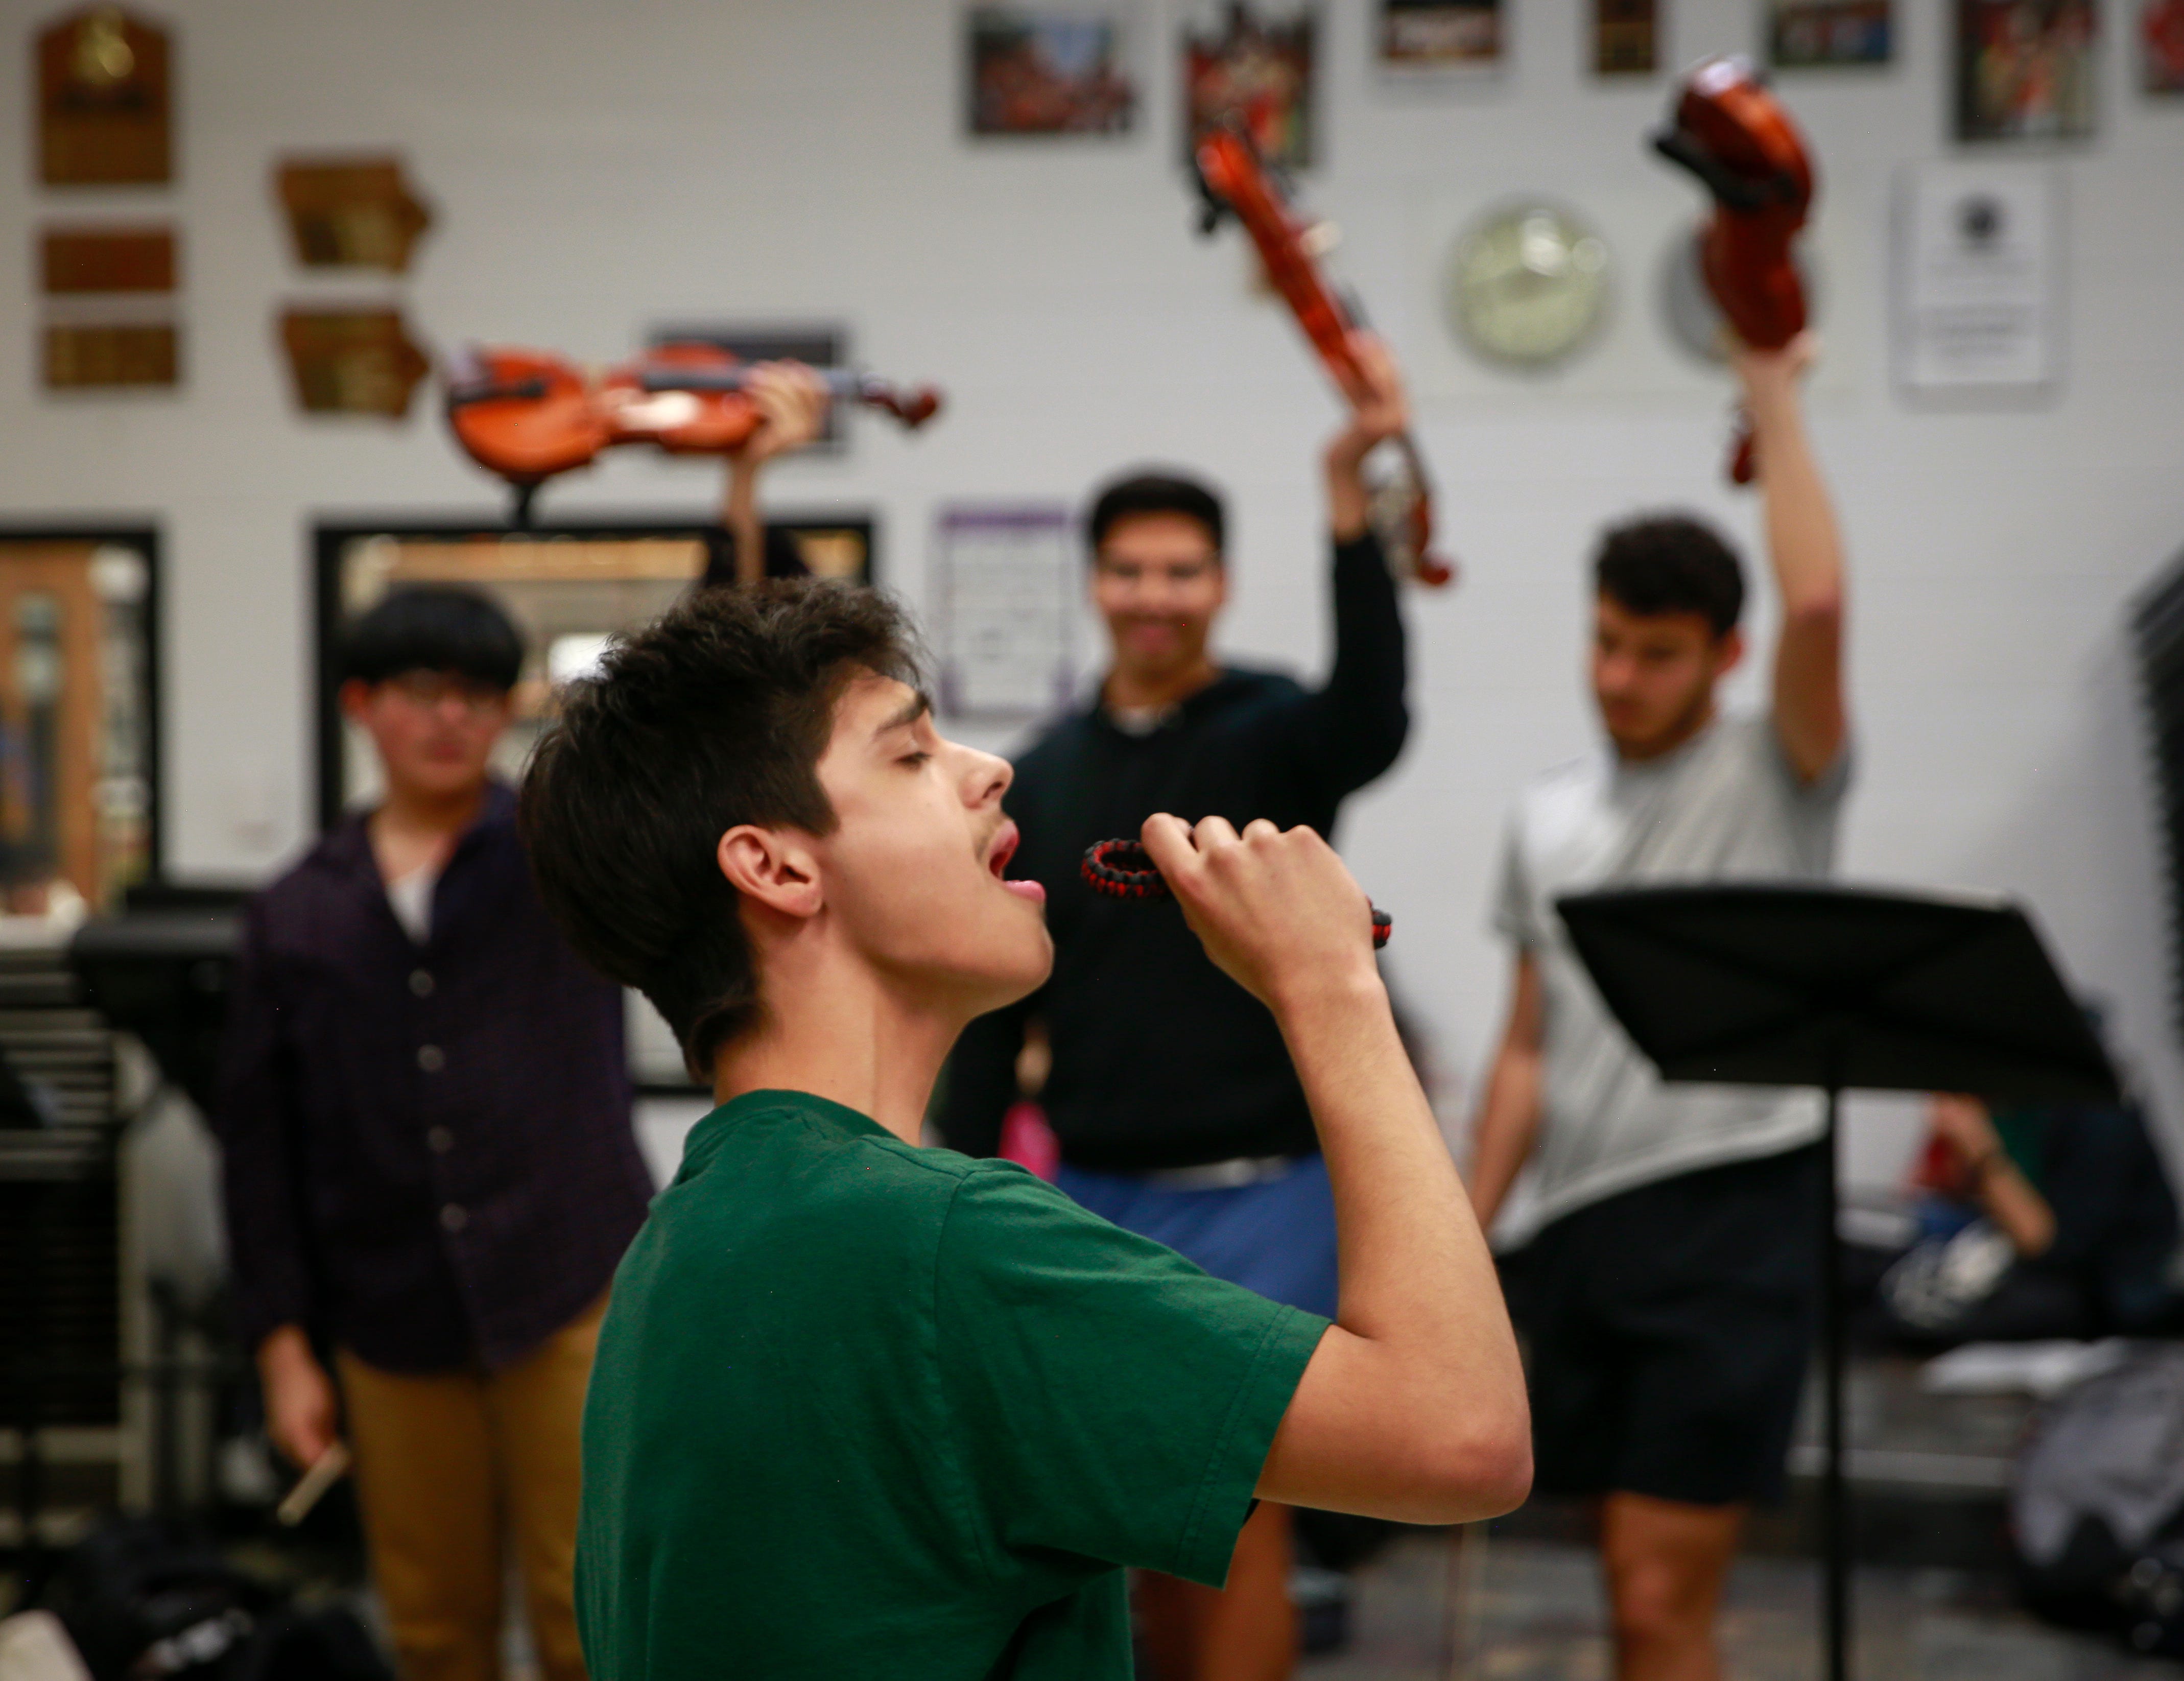 Denison High School senior Brian Ibarra, a member of the Mariachi Reyes del Oeste, the high school's top mariachi ensemble, sings during practice.